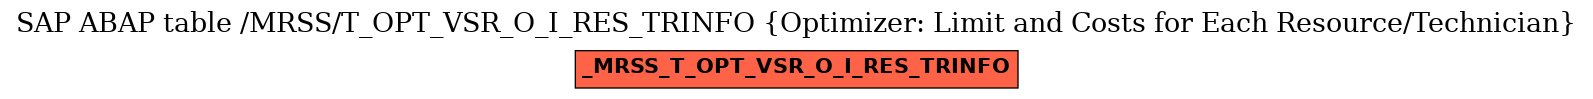 E-R Diagram for table /MRSS/T_OPT_VSR_O_I_RES_TRINFO (Optimizer: Limit and Costs for Each Resource/Technician)